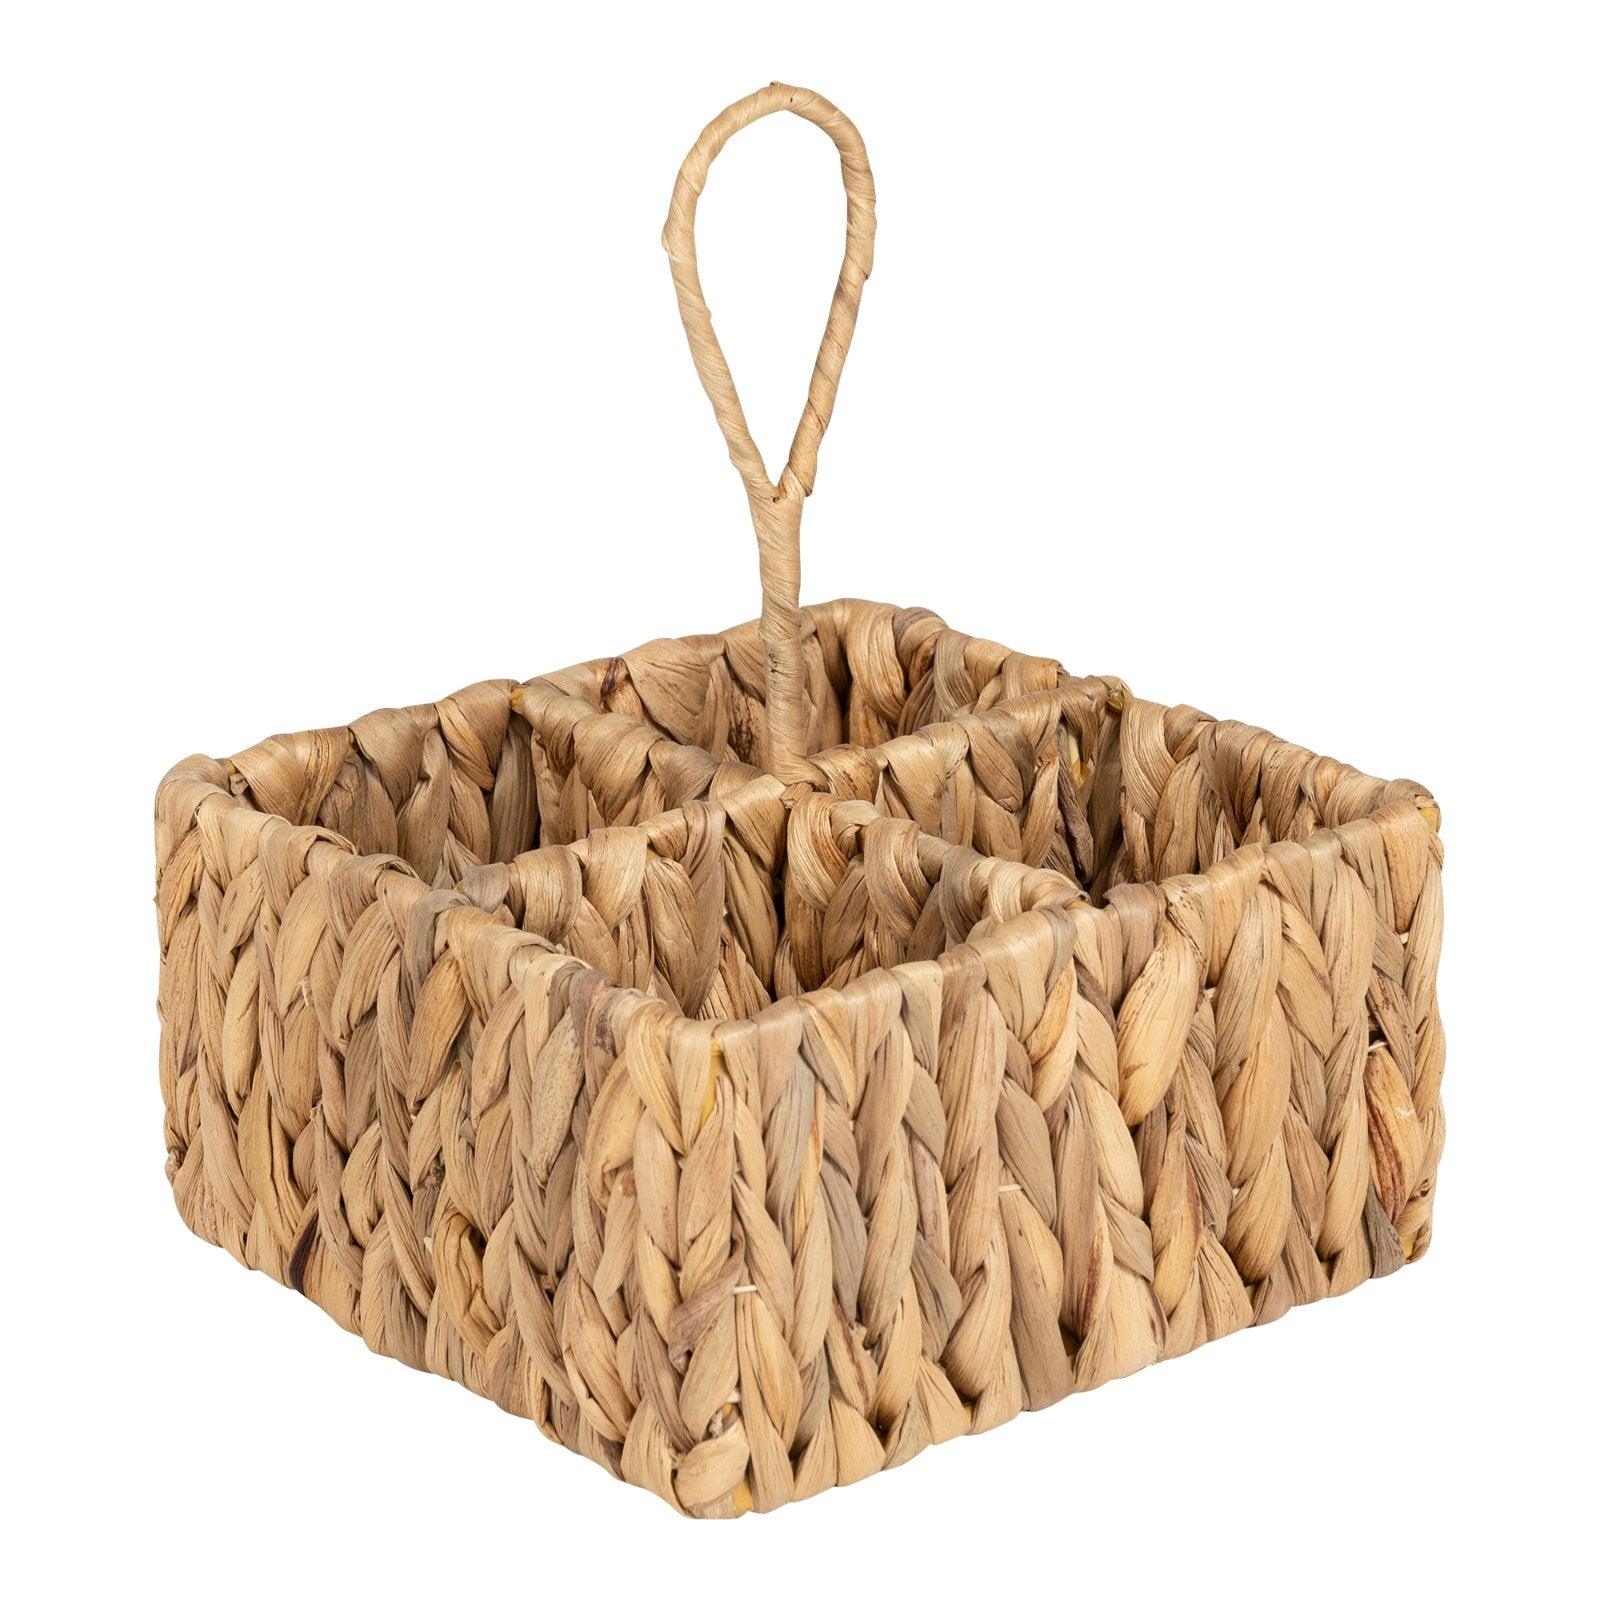 View Square Raffia Weaved Cutlery Holder information